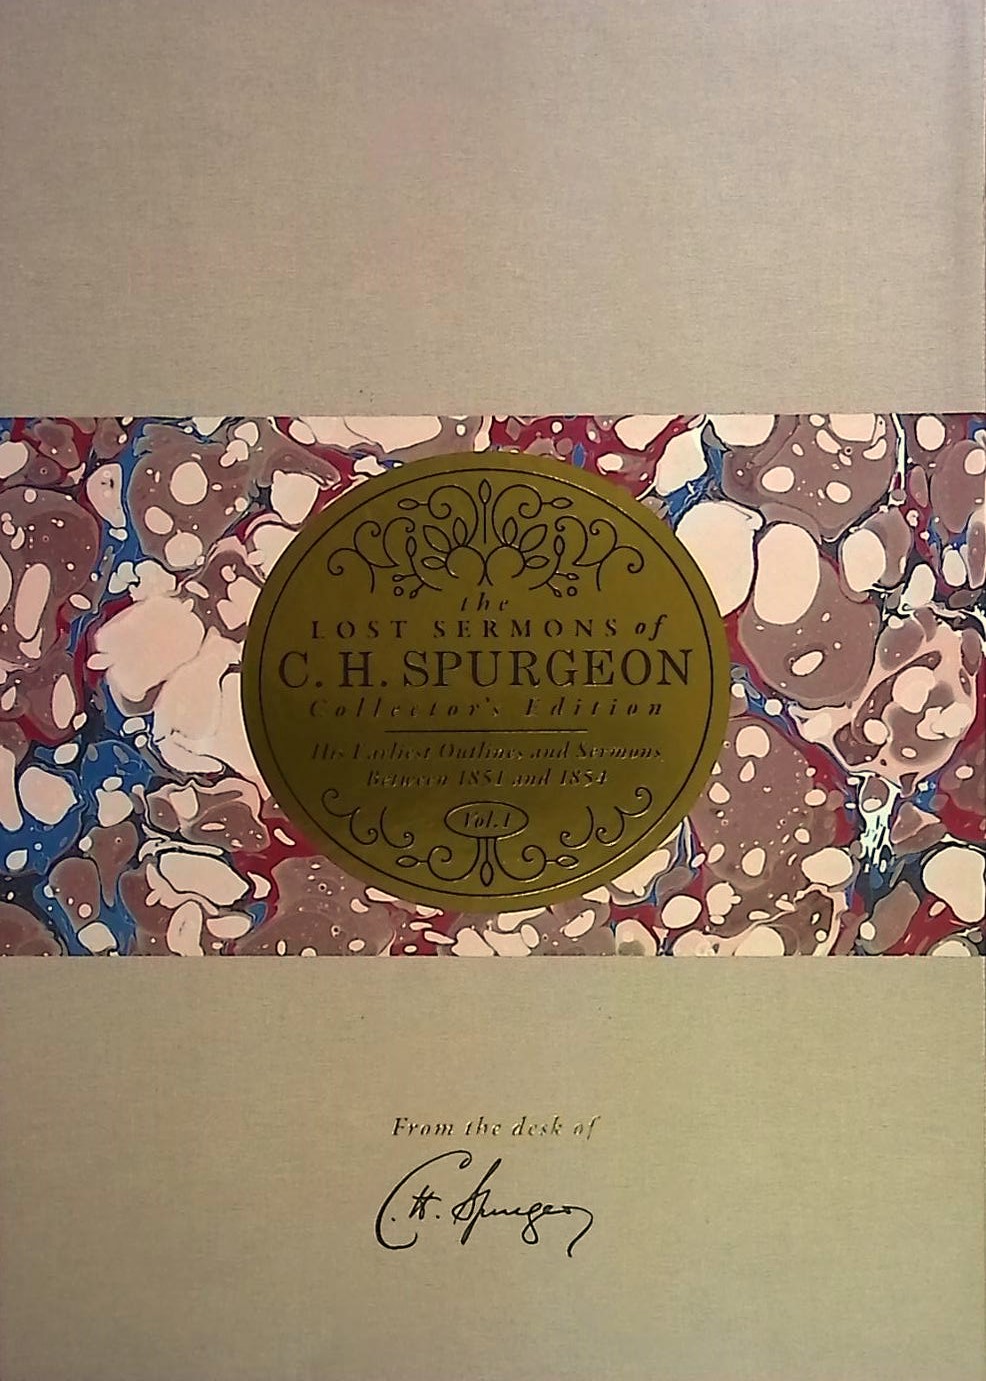 The Lost Sermons of C H Spurgeon. Collector's Edition.